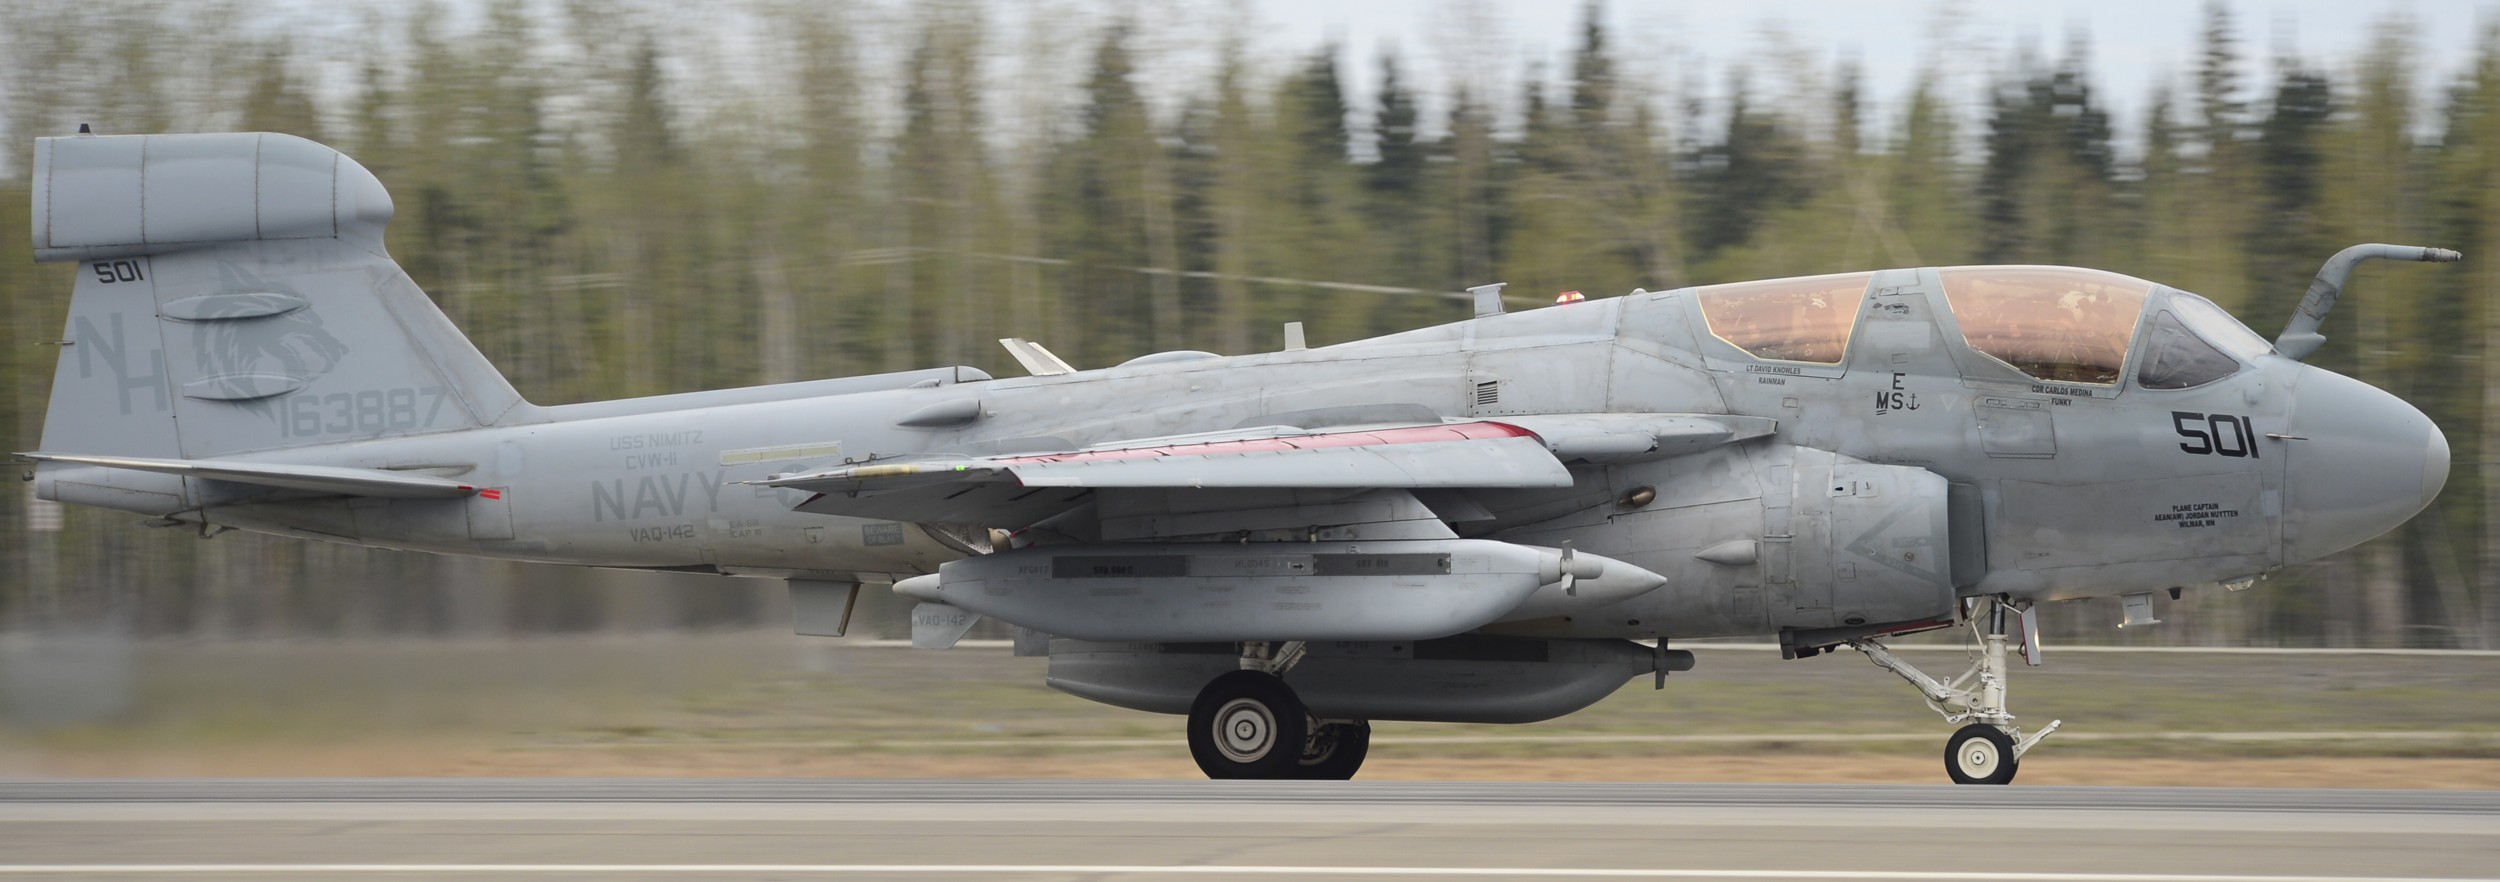 vaq-142 gray wolves electronic attack squadron ea-6b prowler us navy cvw-11 exercise red flag alaska eielson afb 74